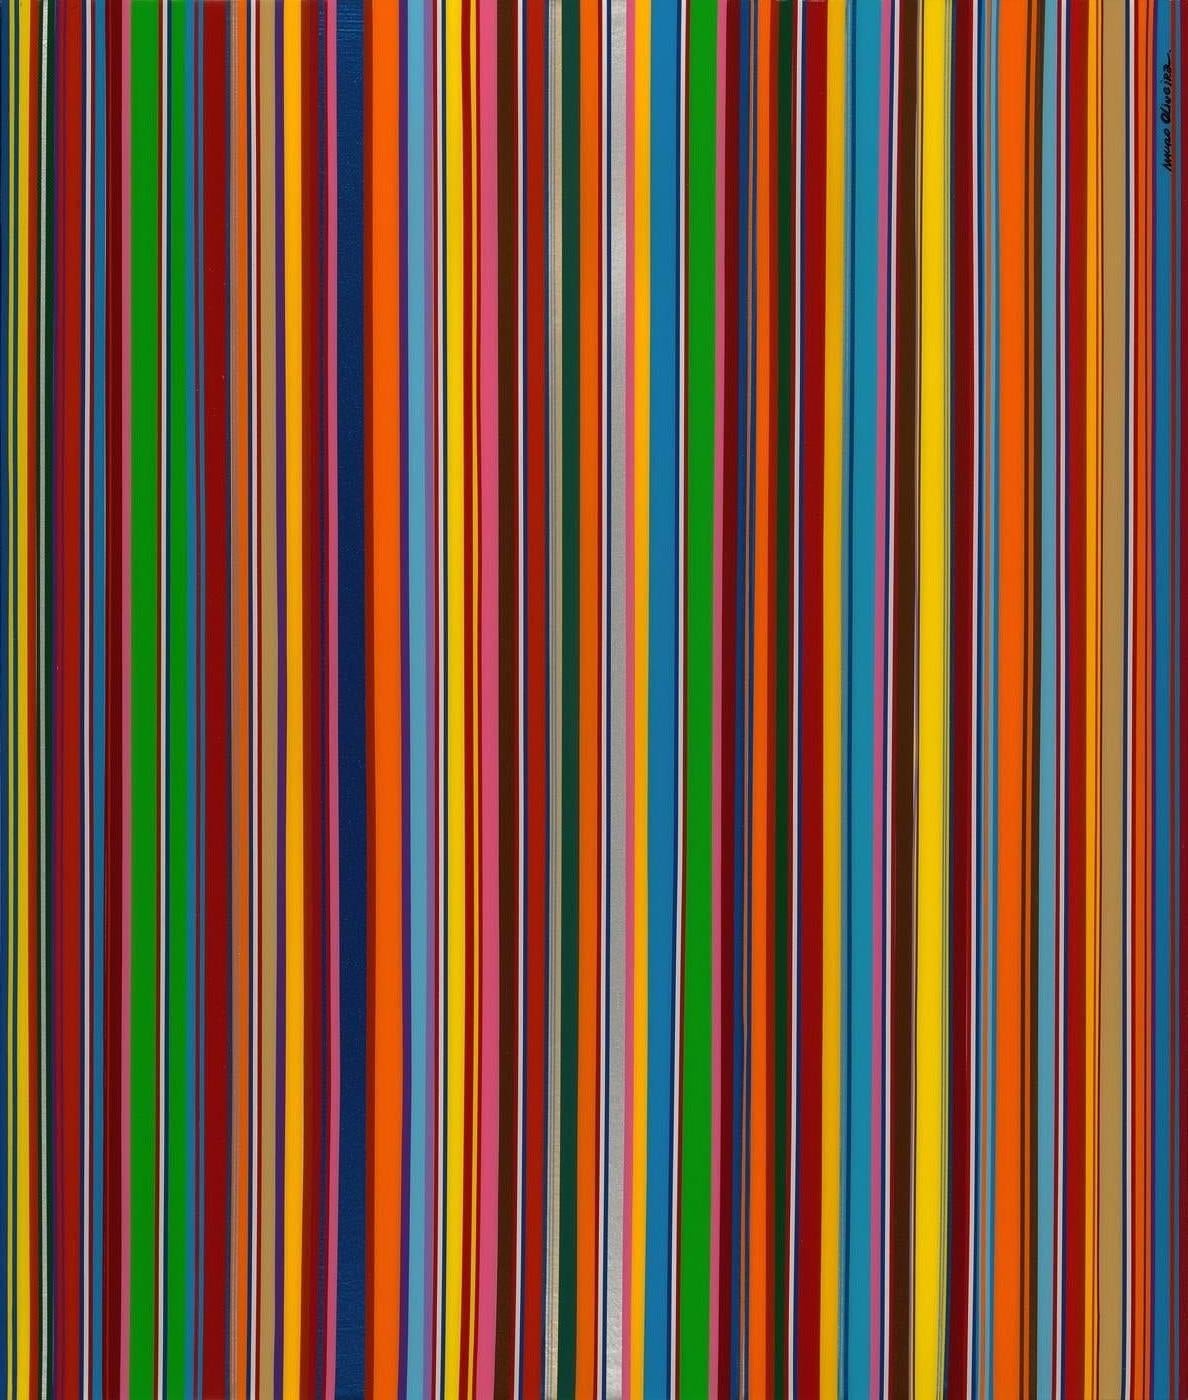 The RAINBOW RAIN Series is a classic and best seller. Using his own created technique, Oliveira uses automobile premium vinyl tapes and vinyl pinstripes to seal their borders. This piece can be hung both horizontal and vertically.

Bring a piece of